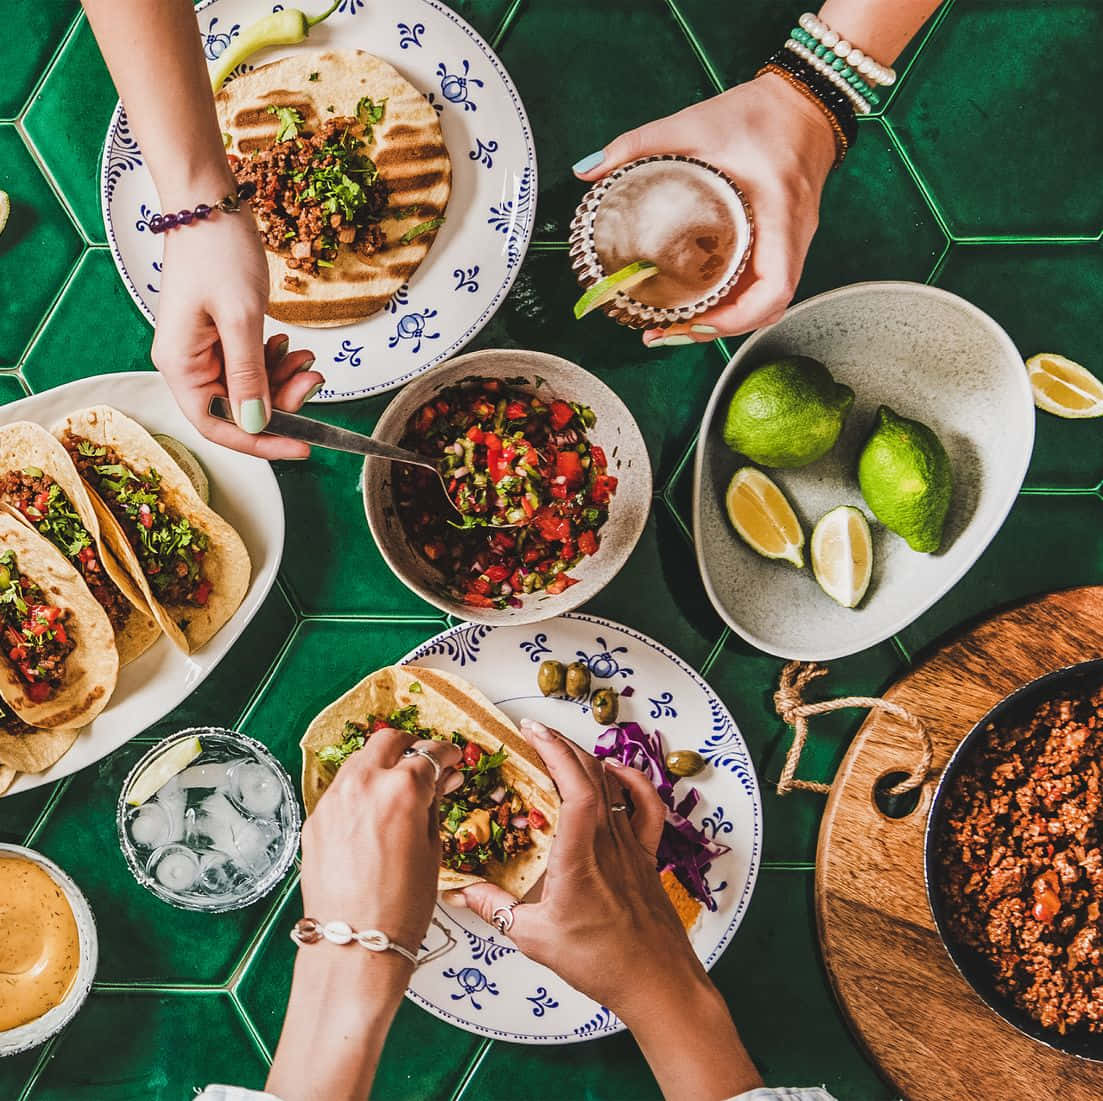 A Group Of People Eating Tacos On A Green Tiled Table